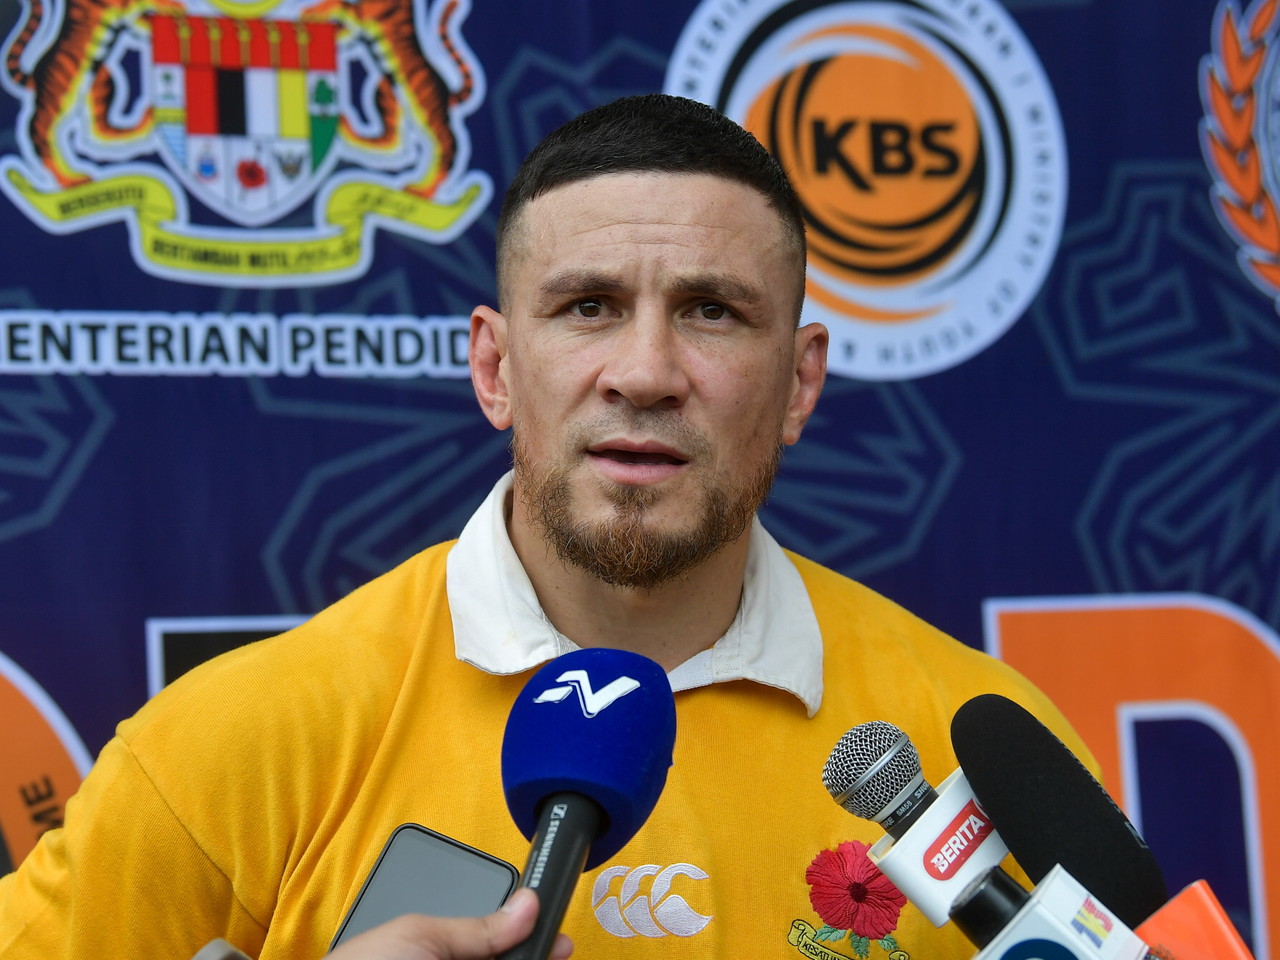 Former All Black Sonny Bill Williams keen to work with Malaysia Rugby